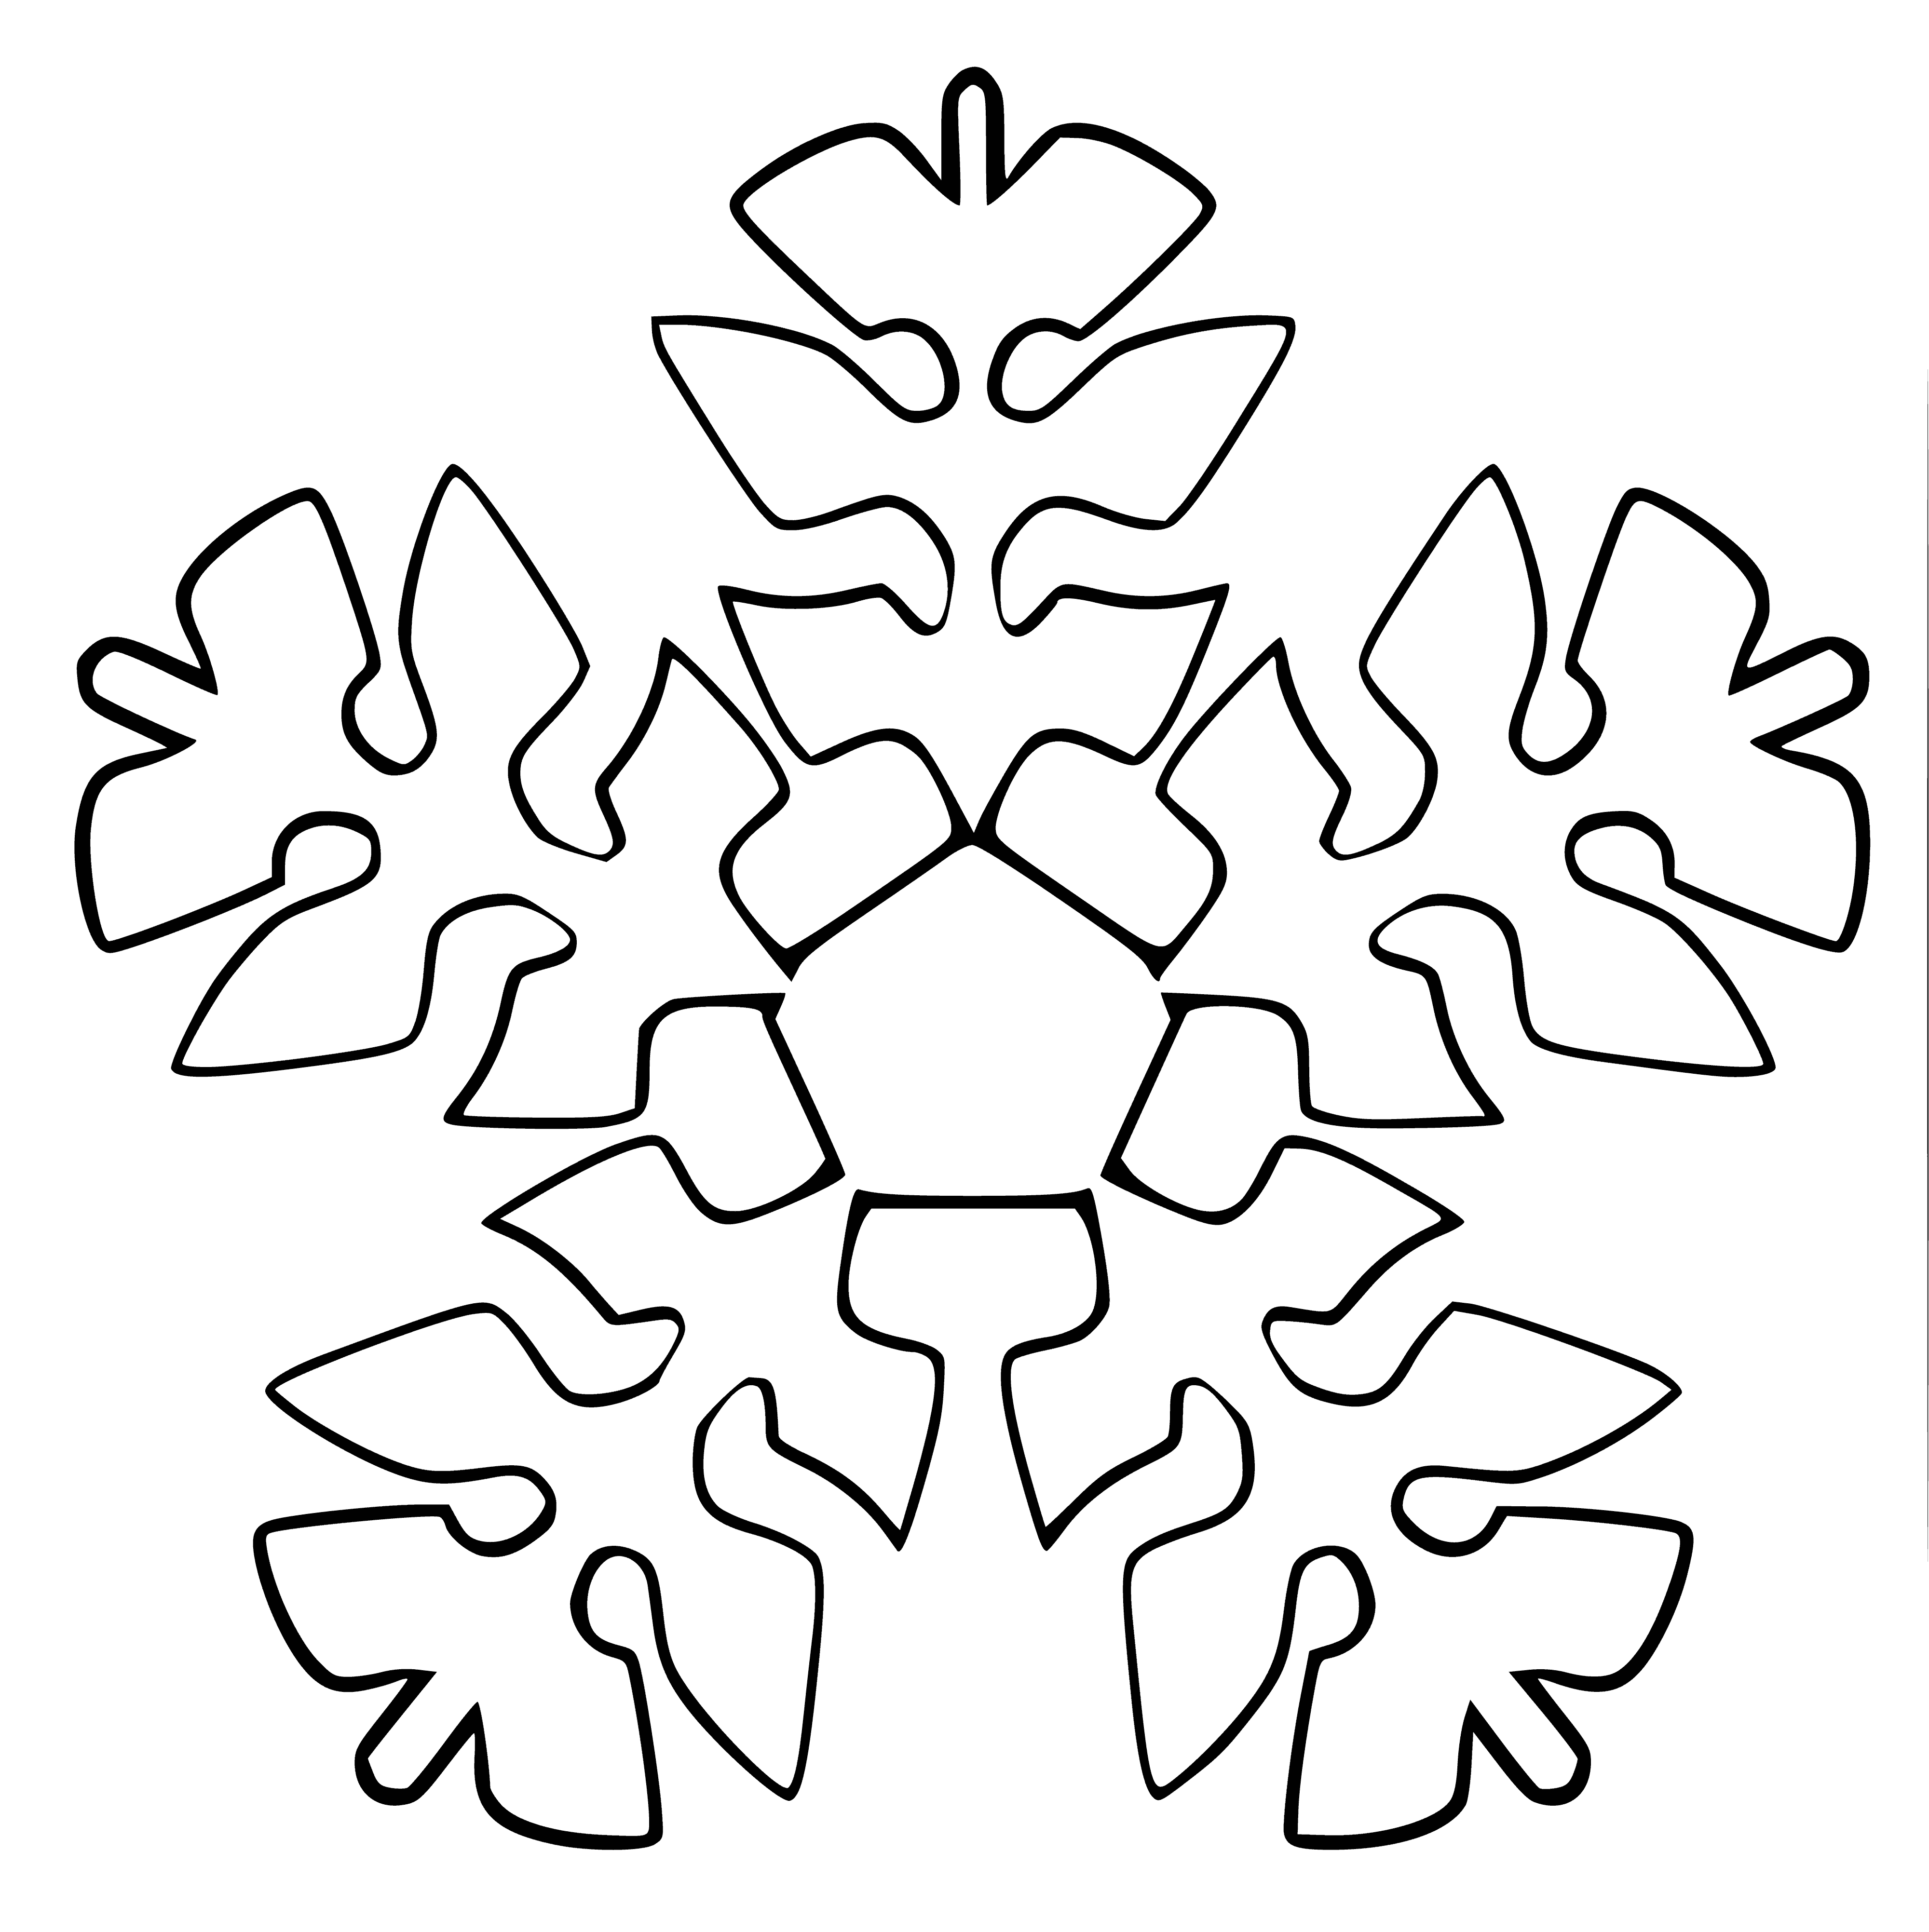 coloring page: Soft snowflakes drift like fragile angels, never-ending shower of frosty miracles each unique with delicate filigree. #snowflakes